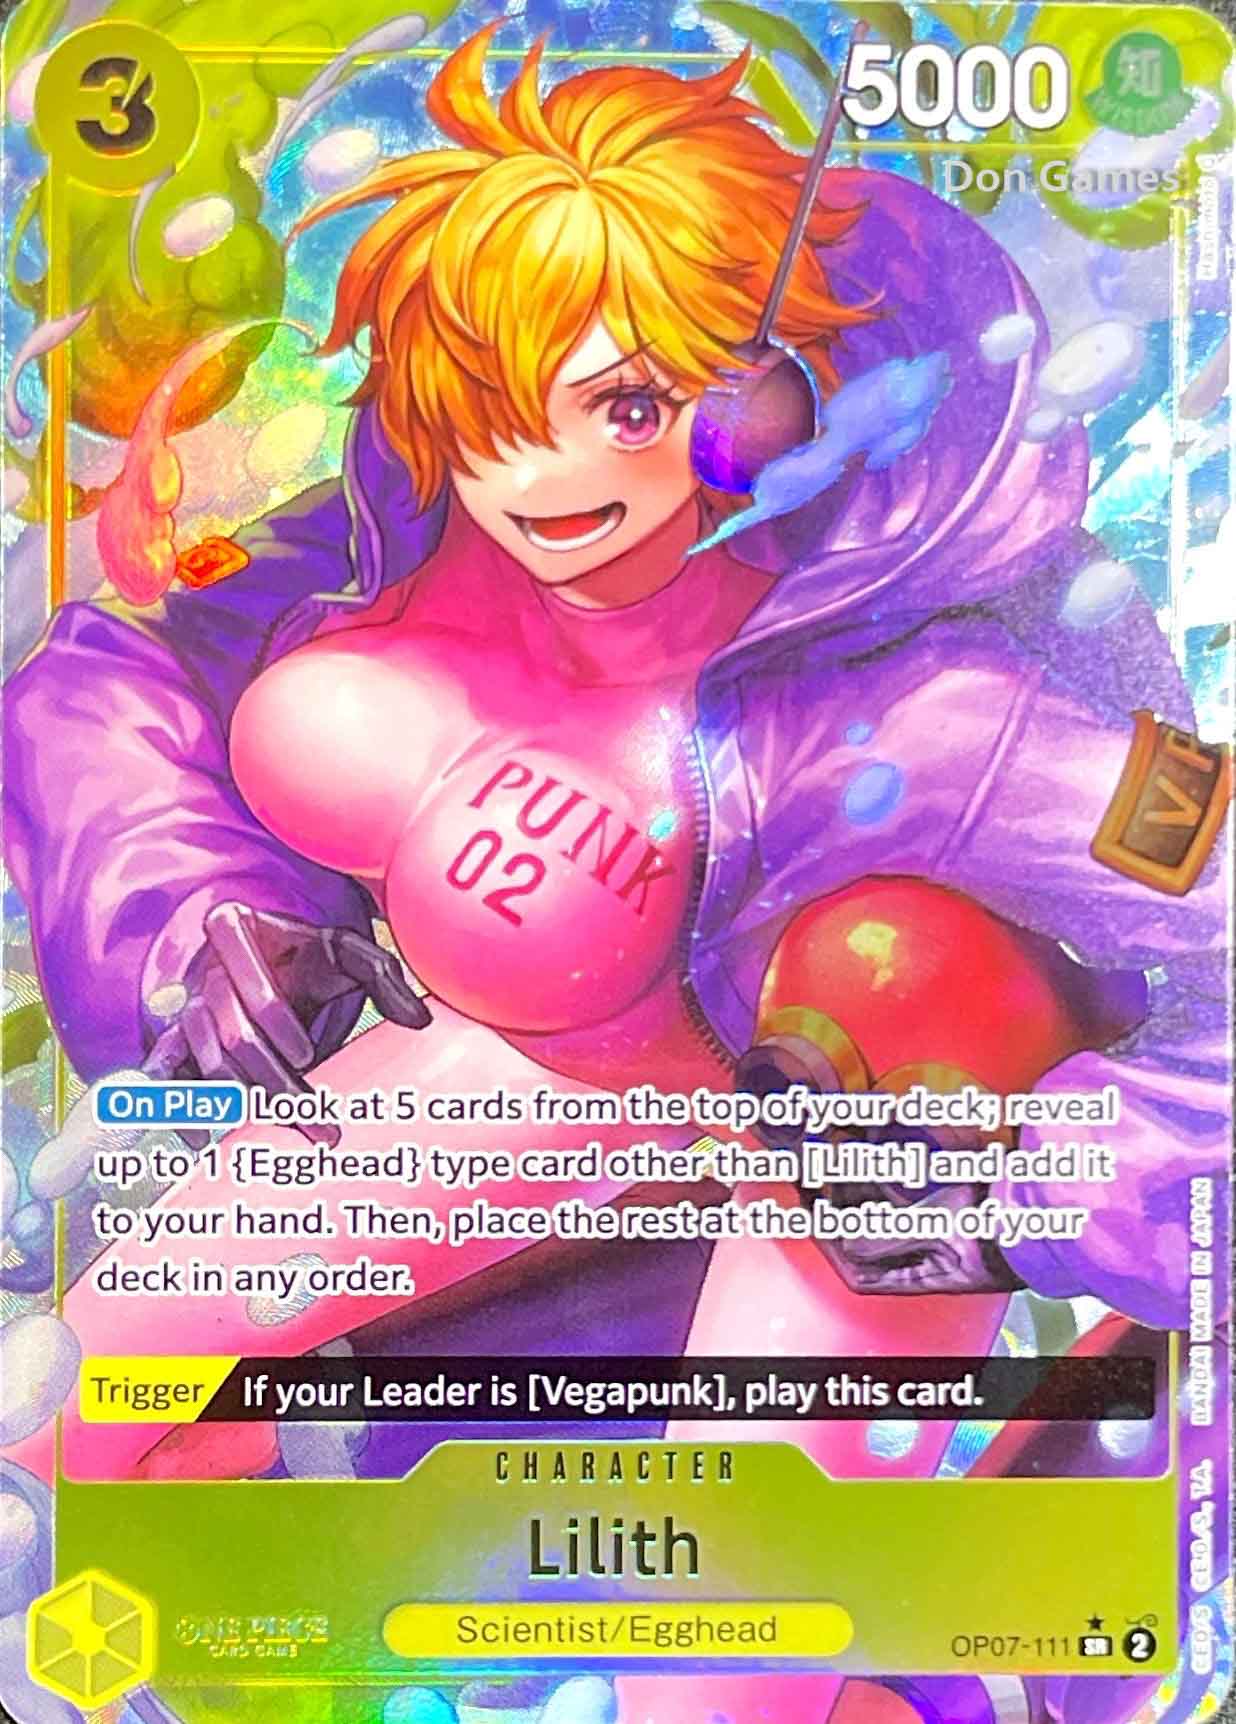 OP07-111 Lilith Character Card Alternate Art